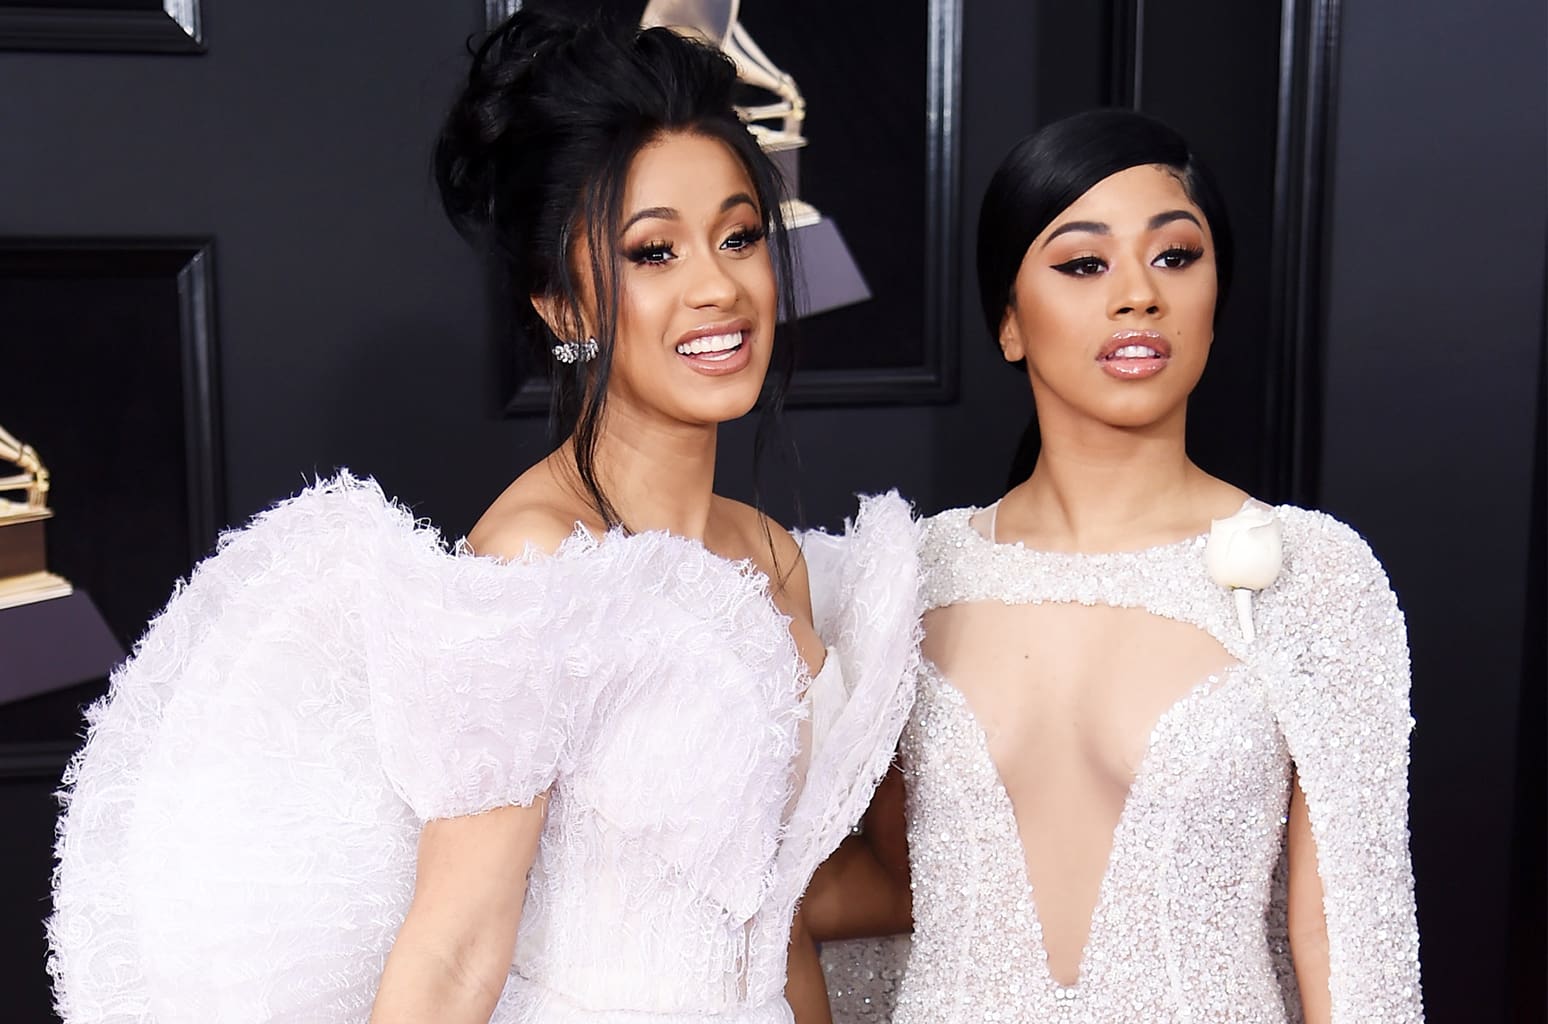 Cardi B Proves Baby Daughter Kulture Looks Just Like Her Sister Hennessy Carolina ...1548 x 1024